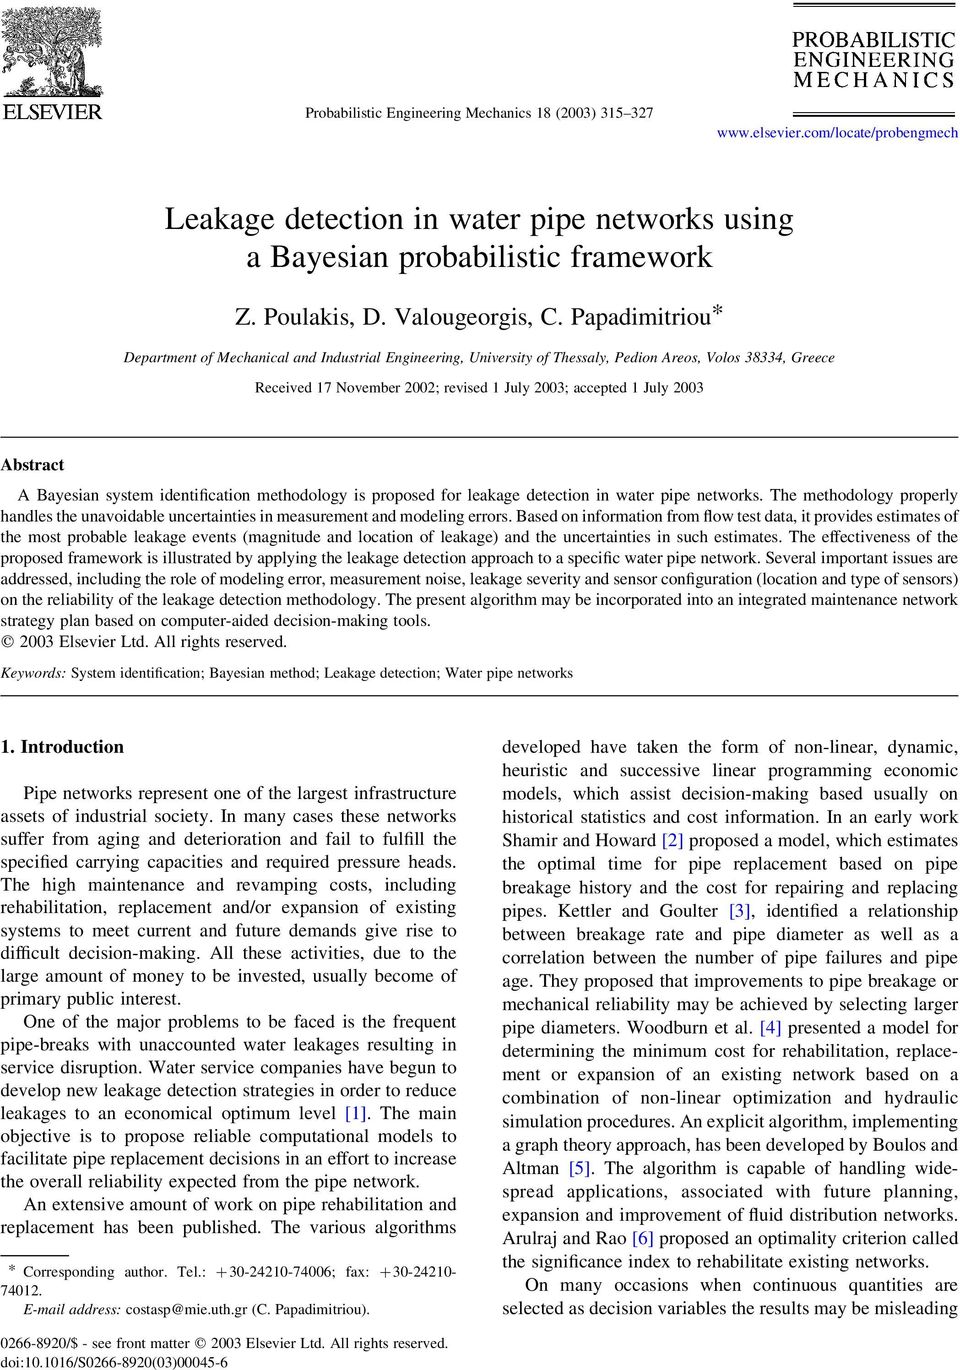 Bayesian system identification methodoogy is proposed for eakage detection in water pipe networks. The methodoogy propery handes the unavoidabe uncertainties in measurement and modeing errors.